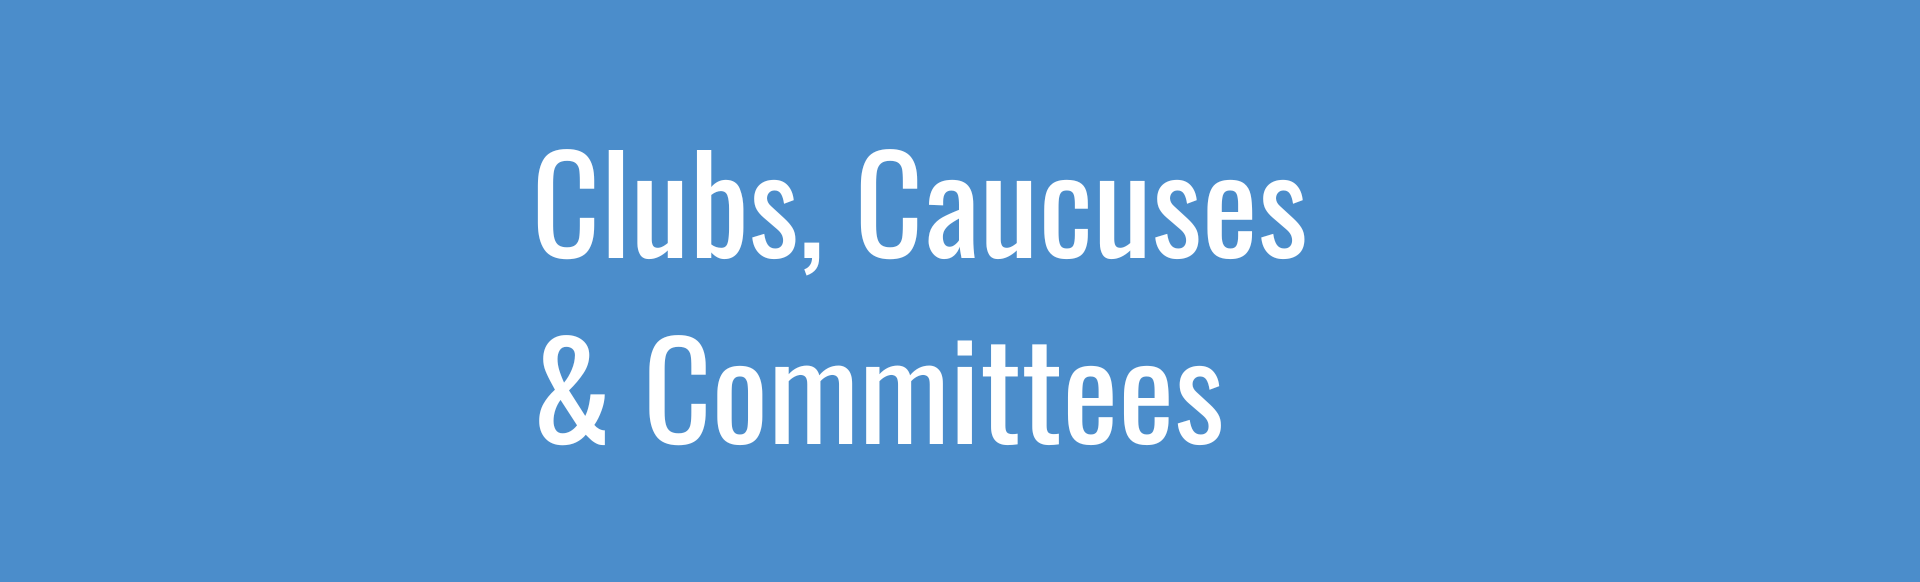 Clubs Caucuses Committees